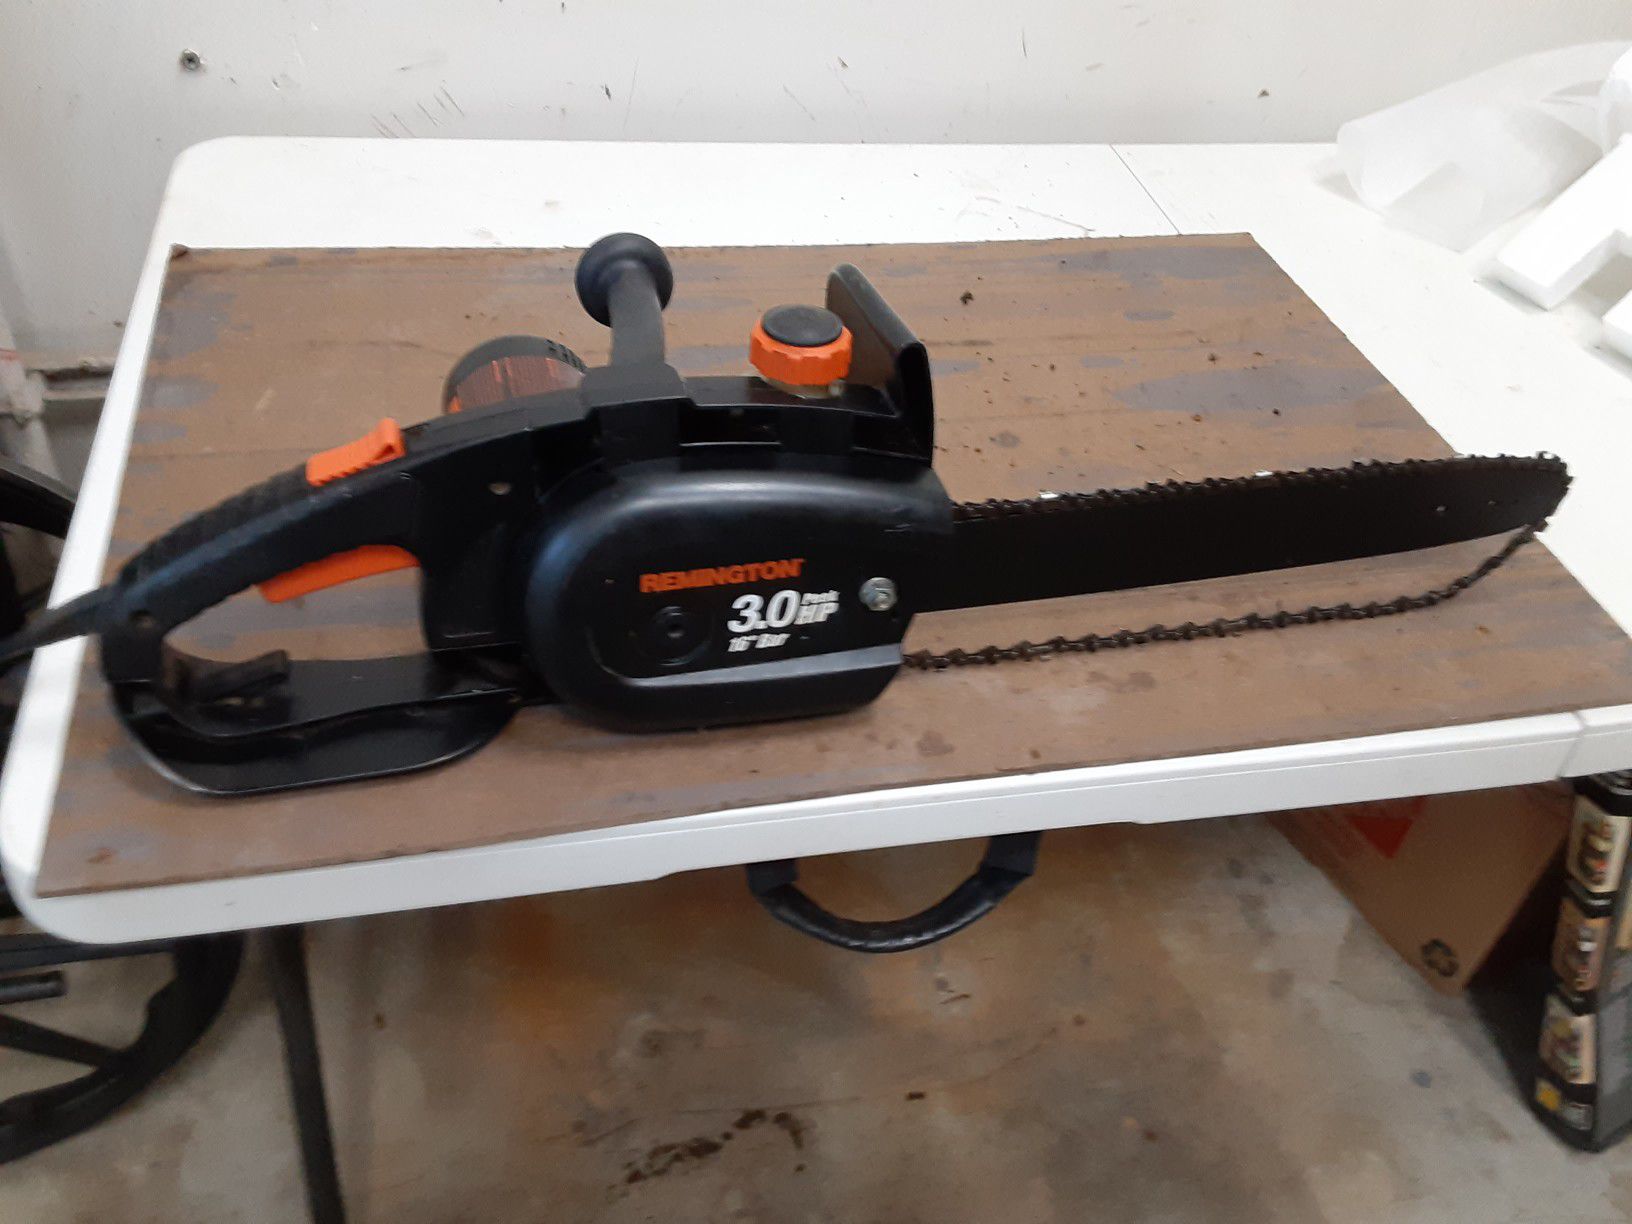 Remington electric 16 in chainsaw